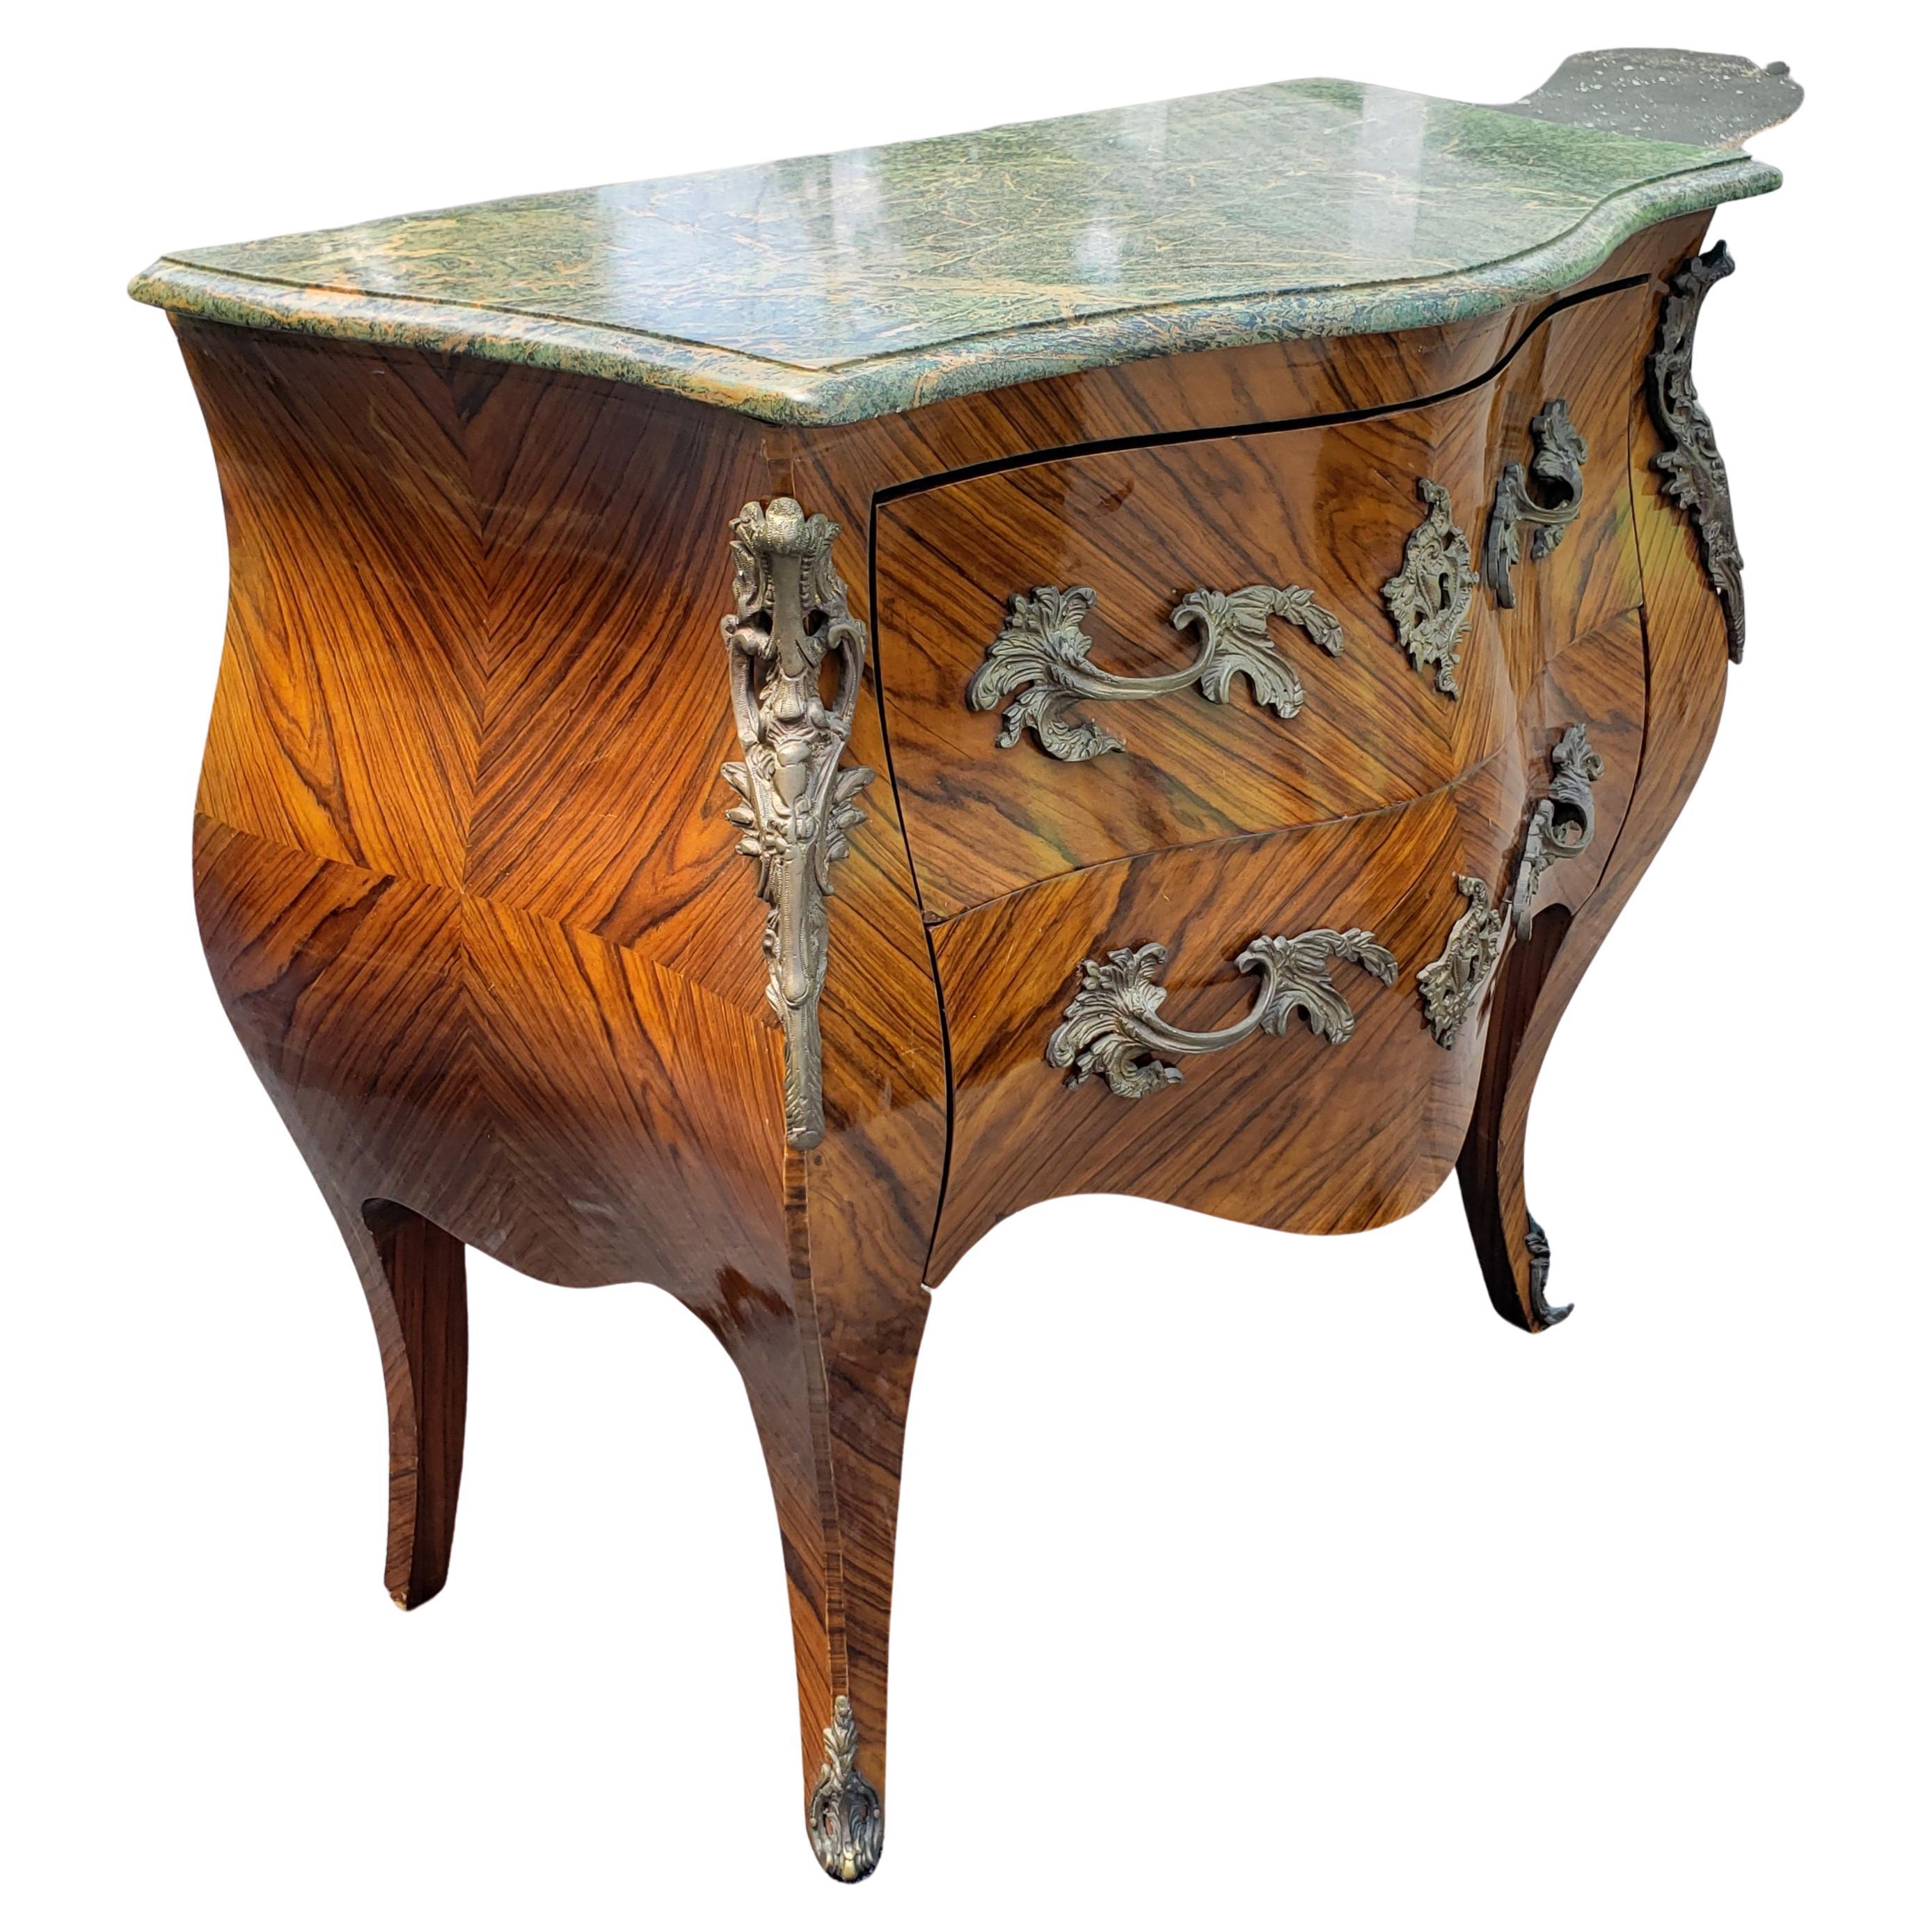 20th Century French Louis XVI Bombe Marquetry and Bronze Ormolu Commode w/ Marble Top, C1880s